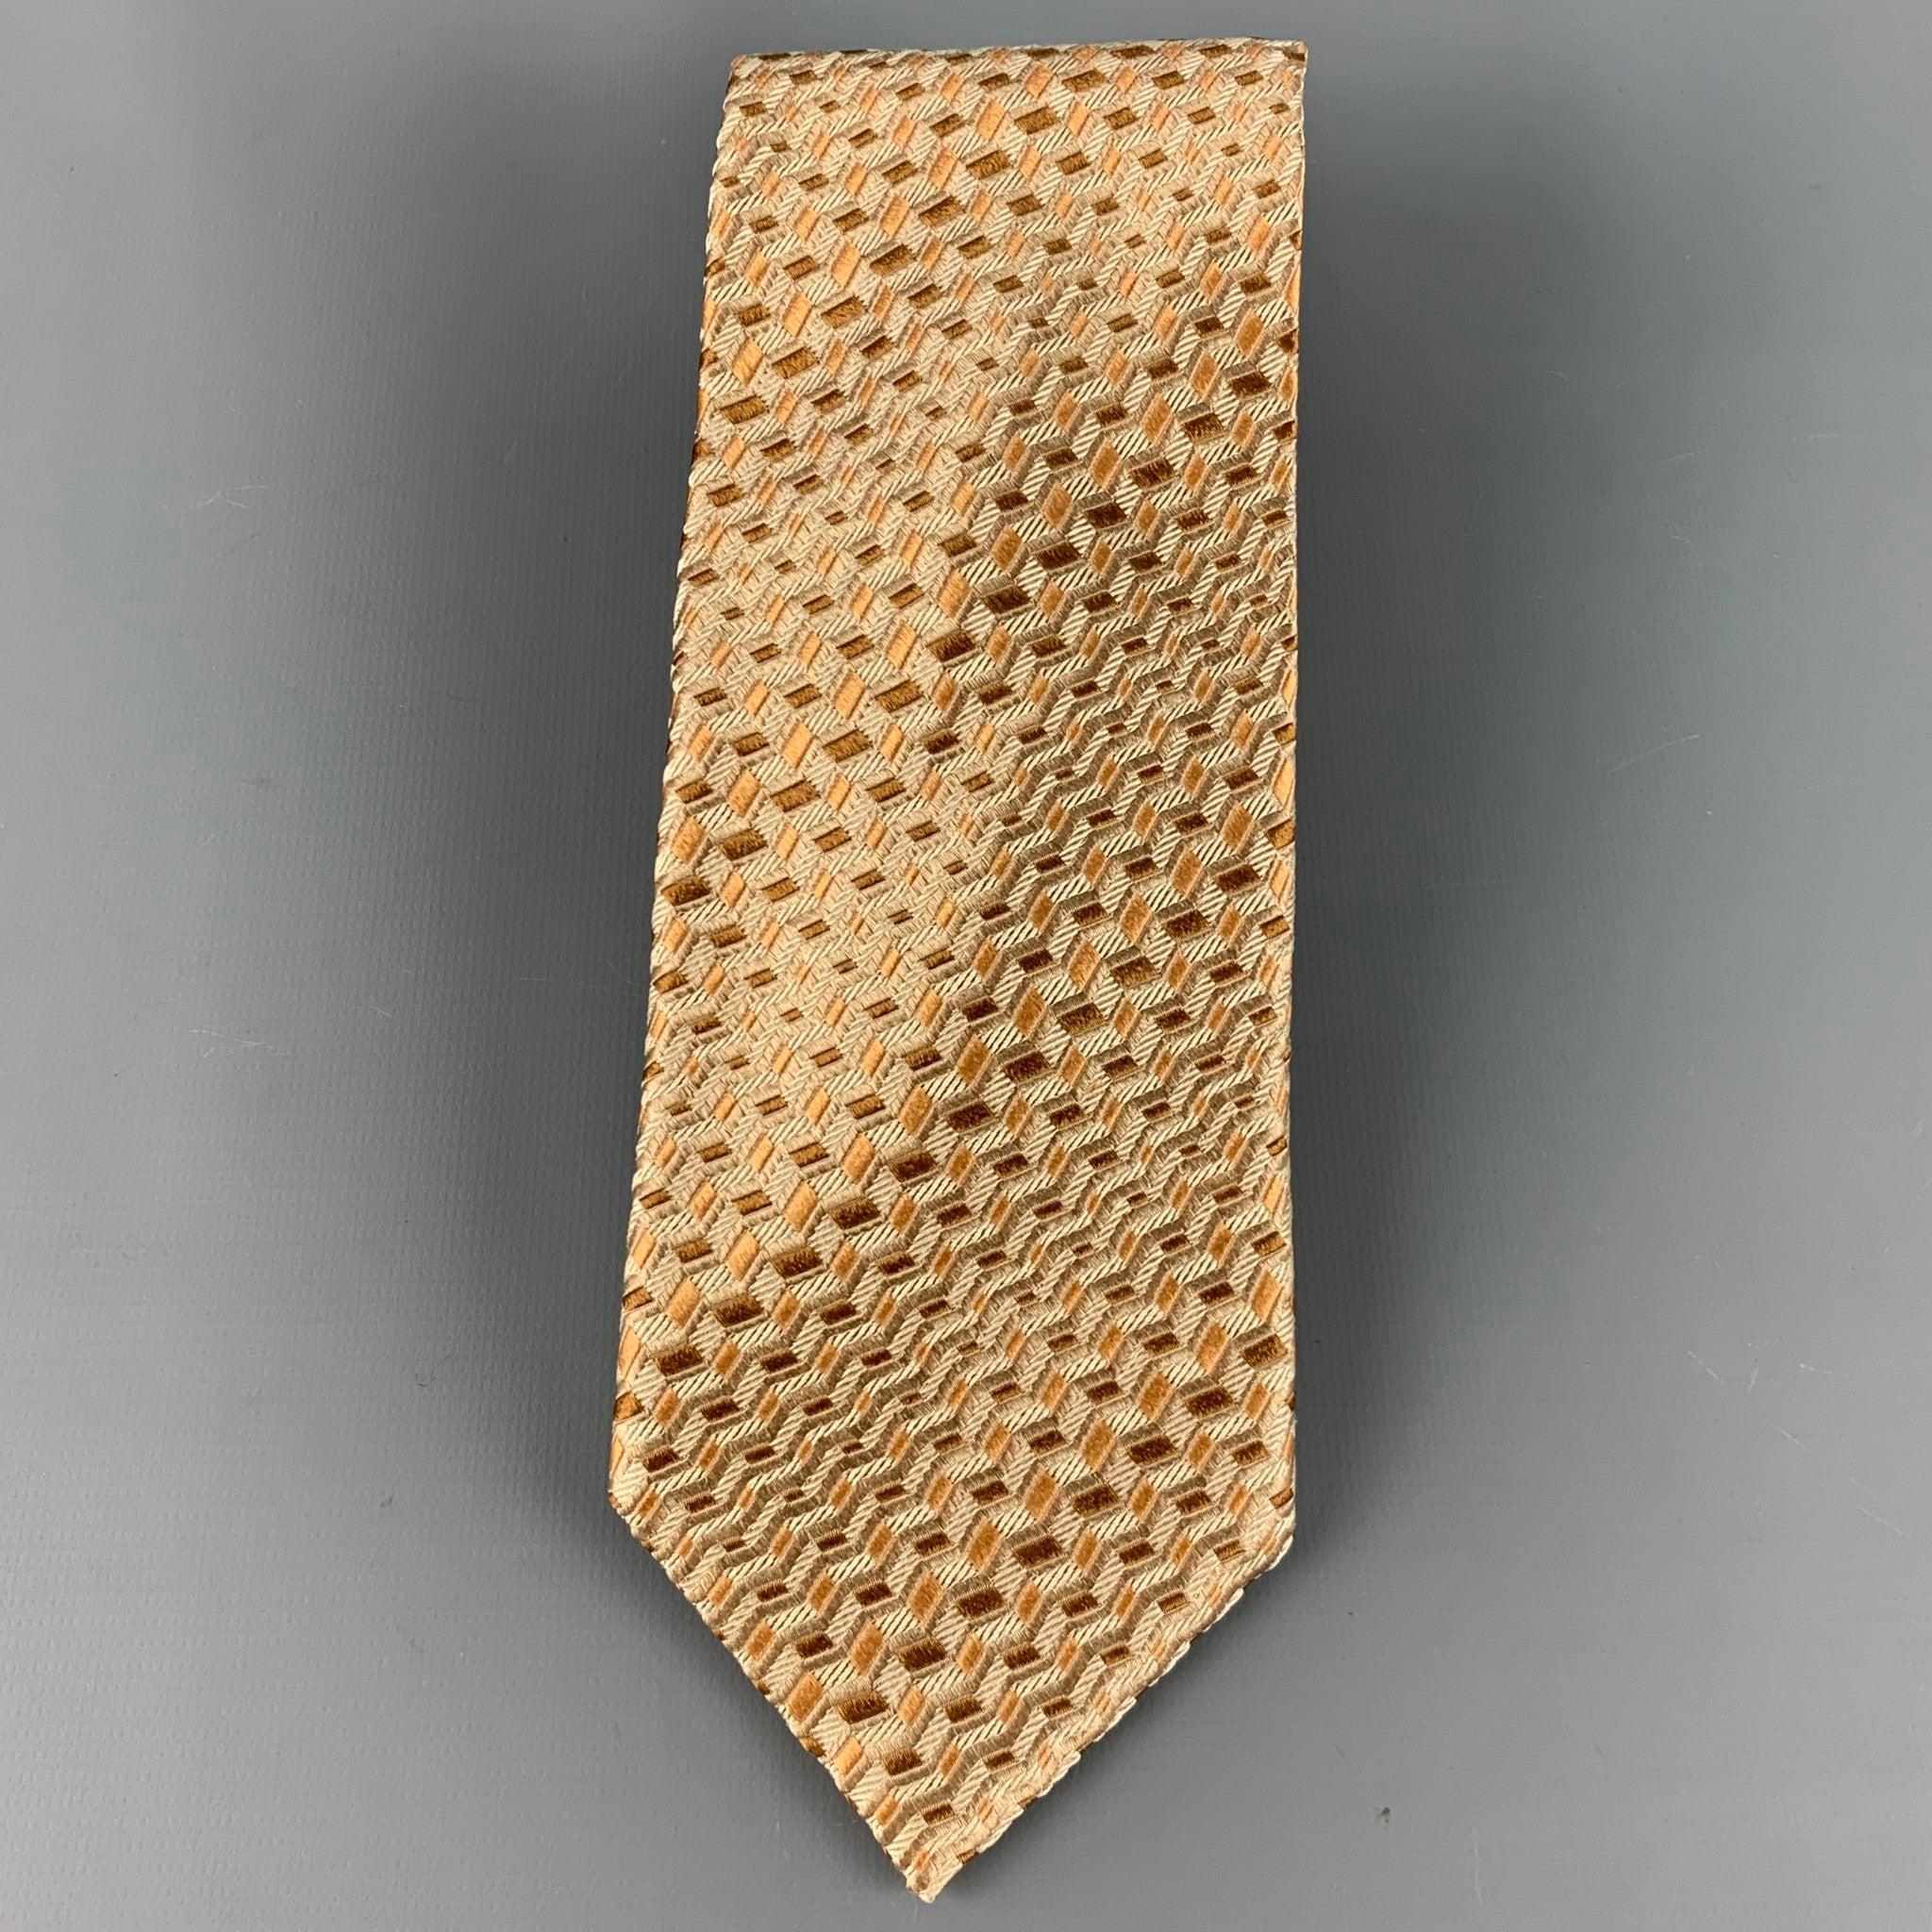 CANALI tie in 100% silk, featuring a tan and taupe zigzag jacquard pattern. Made in Italy.Very Good Pre-Owned Condition. 

Measurements: 
  Width: 4 inches Length: 59 inches 
  
  
 
Reference: 126582
Category: Tie
More Details
    
Brand: 